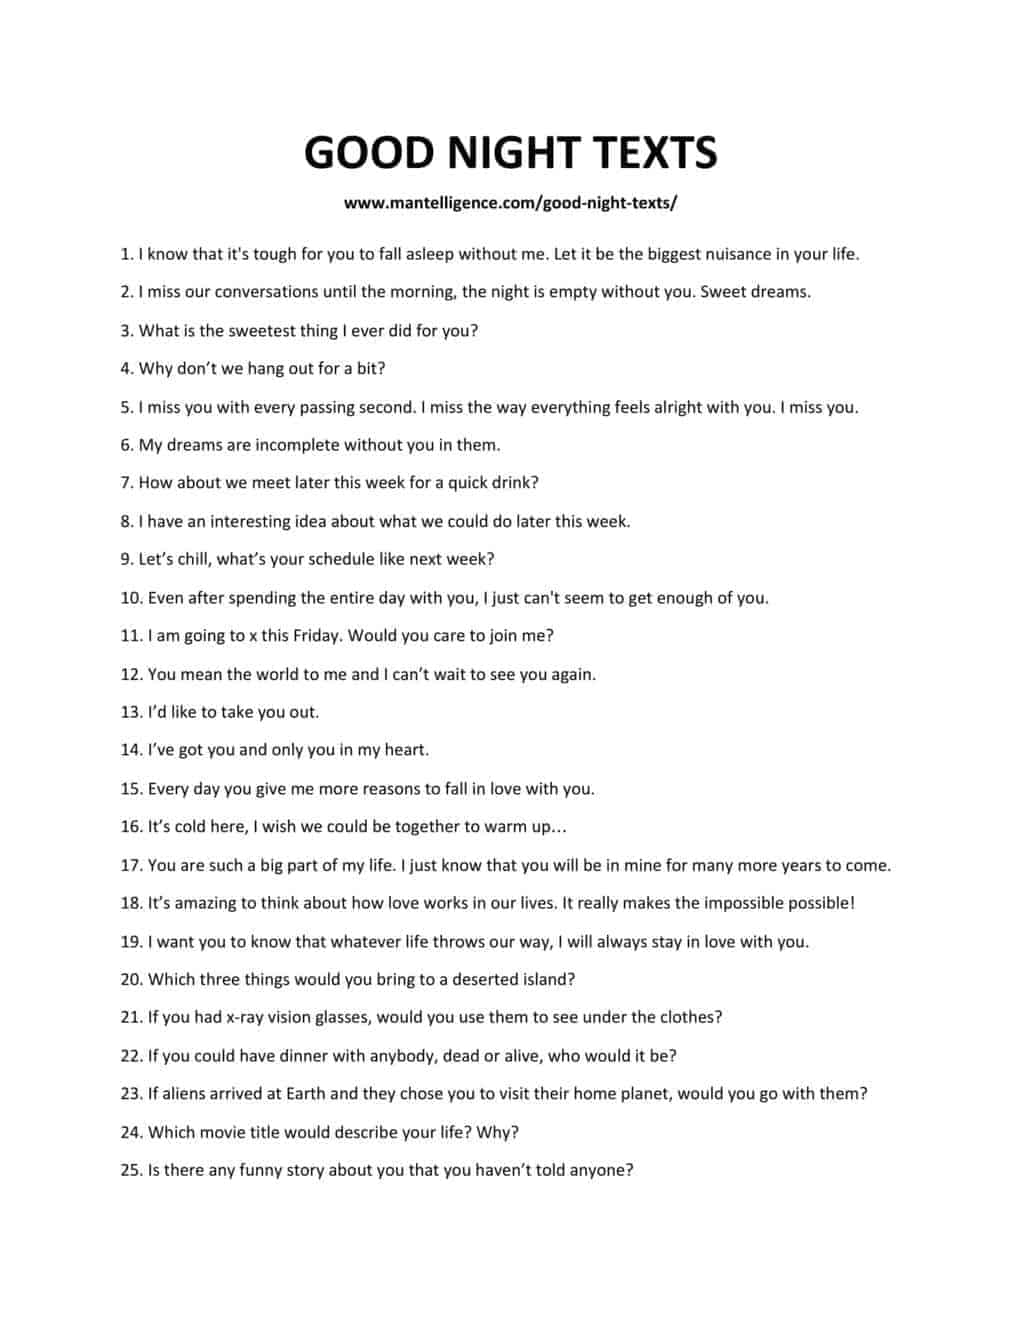 How to tell a girl goodnight